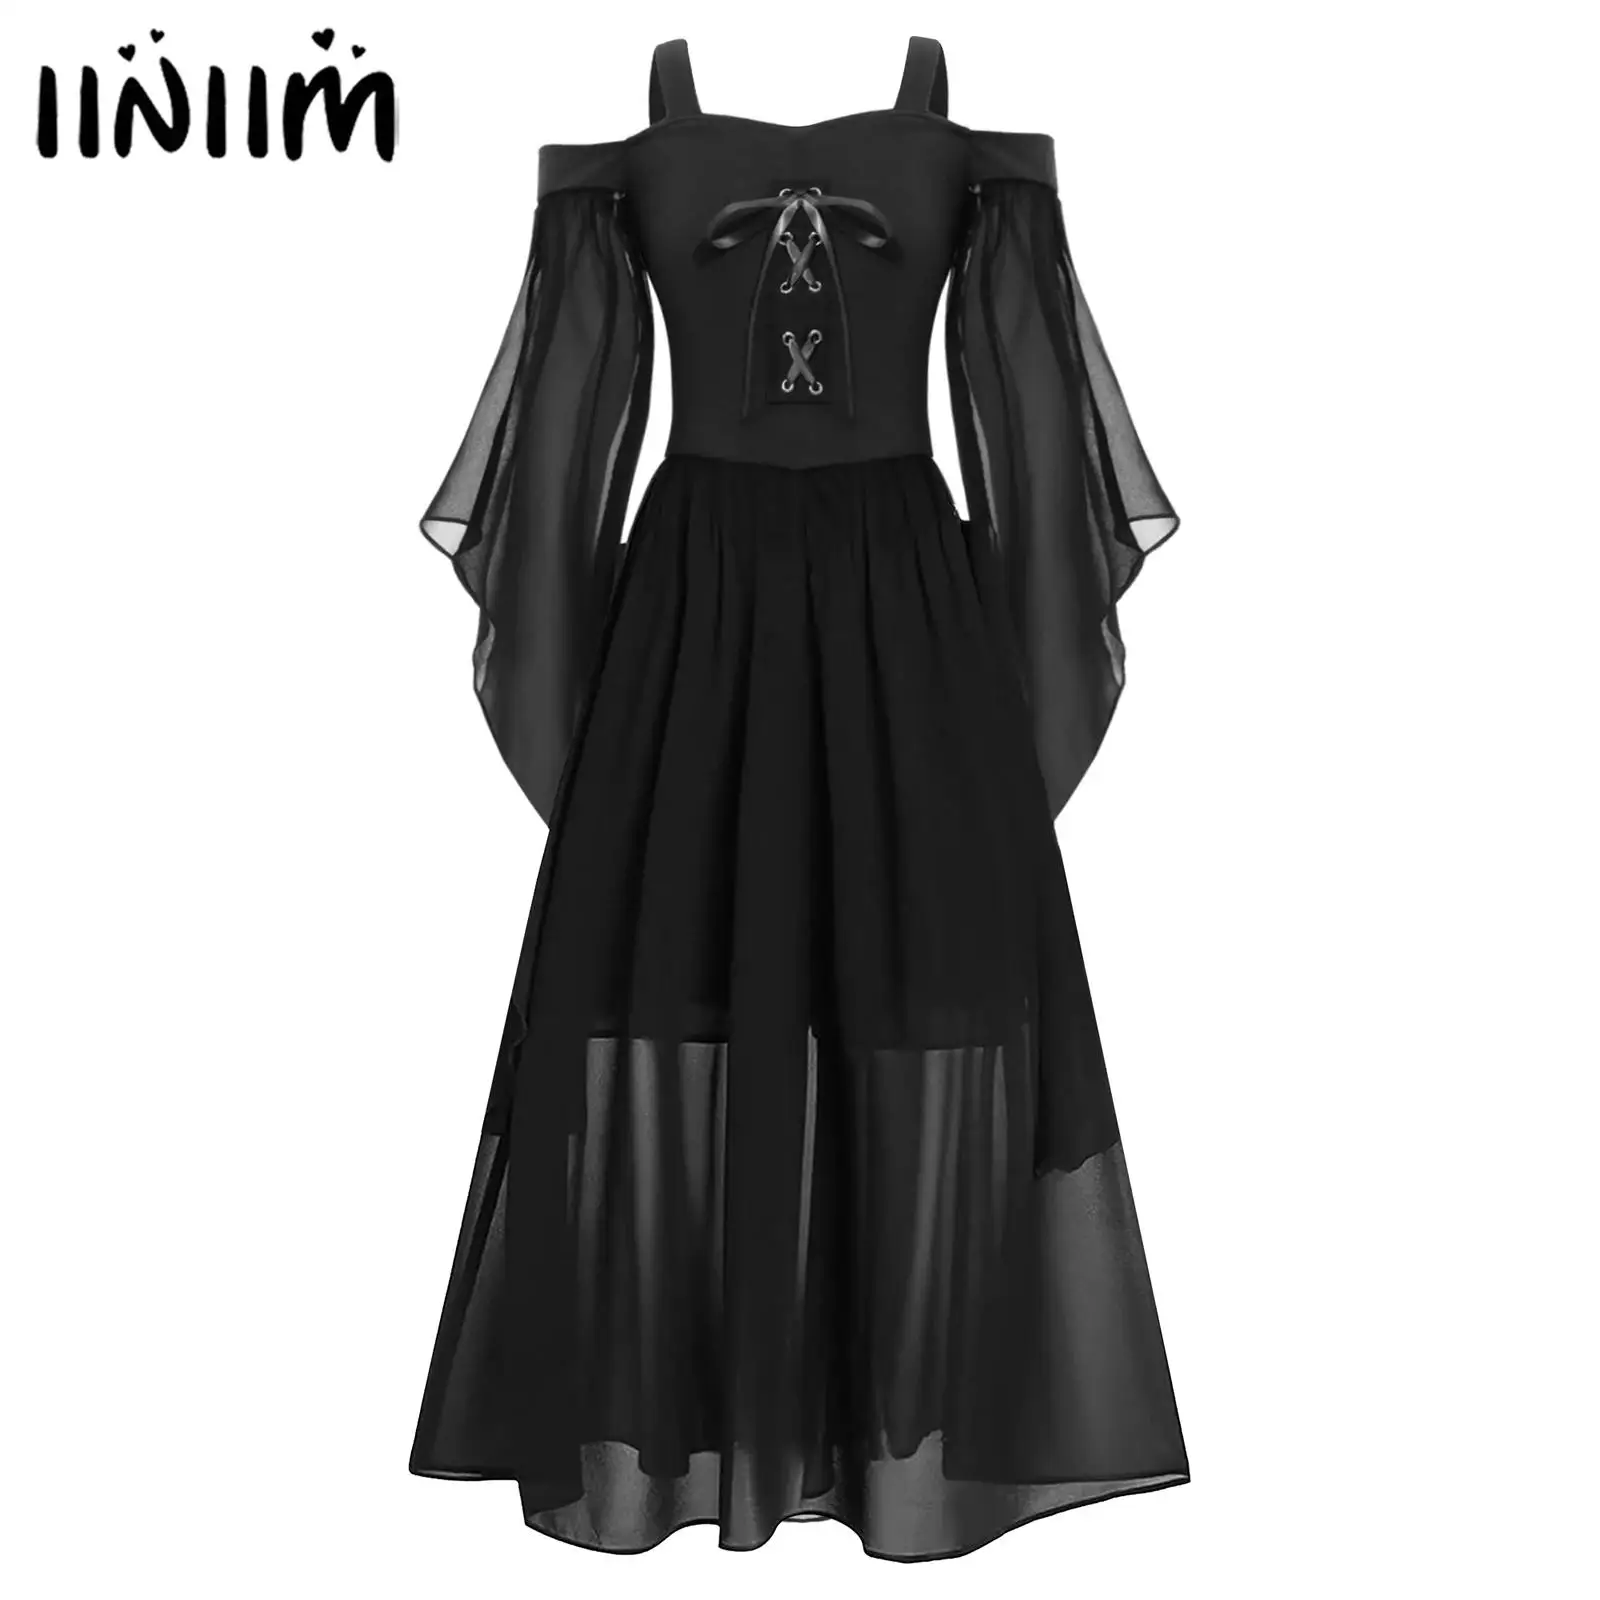 

Girls Medieval Renaissance Elf Princess Lolita Gothic Queen Party Dress Cosplay Outfit Lace Up Front Flowy Halloween Costumes